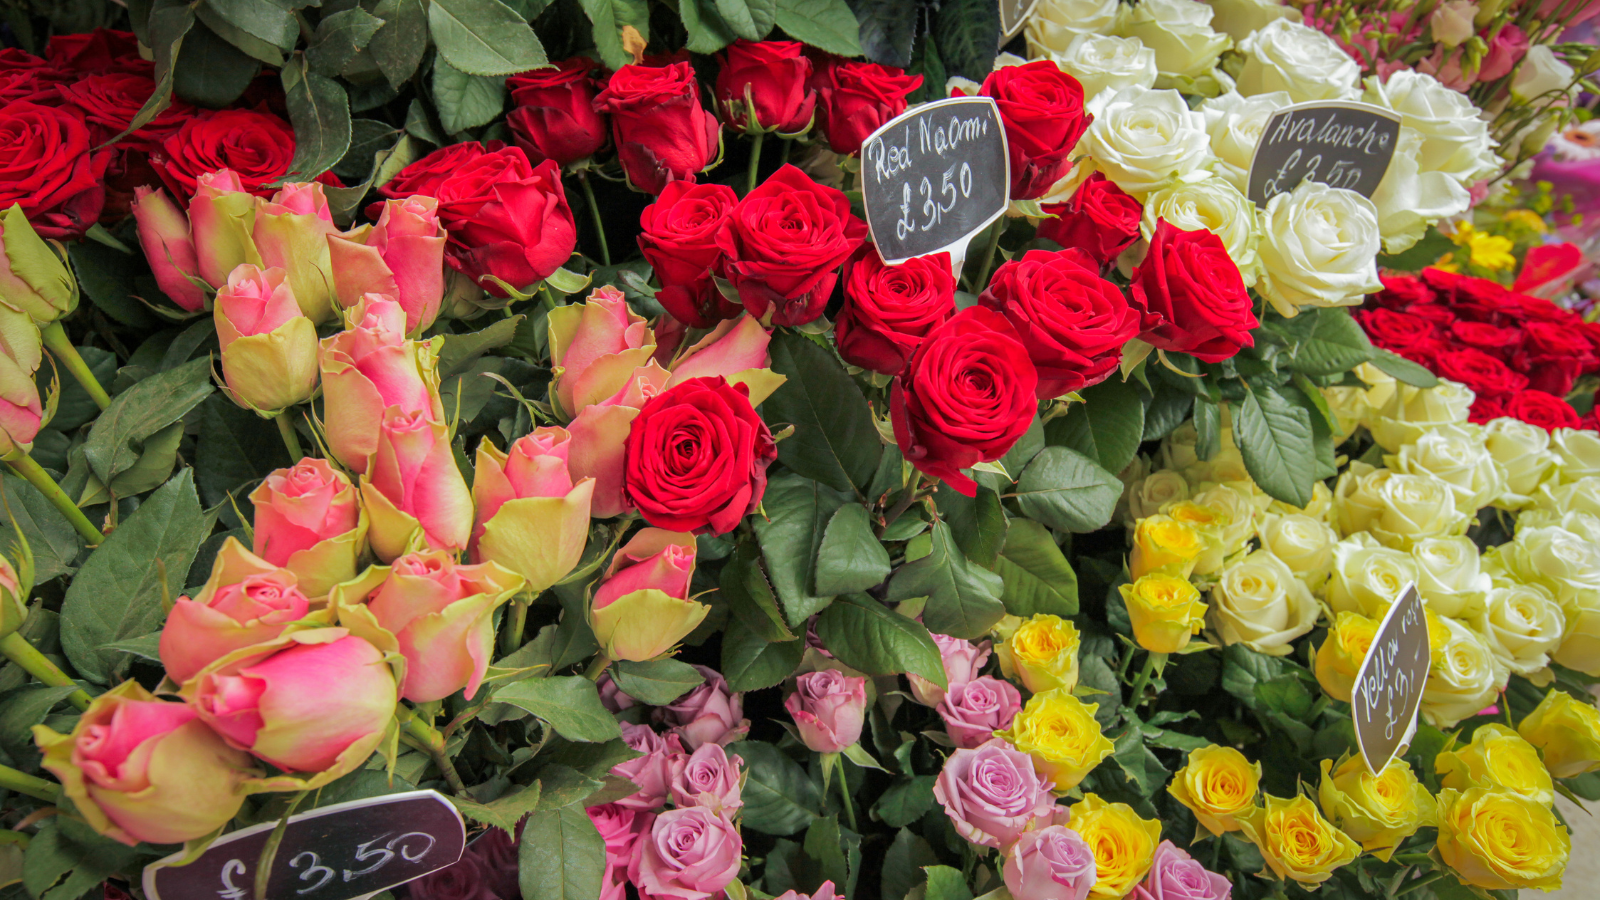 Roses for sale on the flower stand at Victoria train station in London.